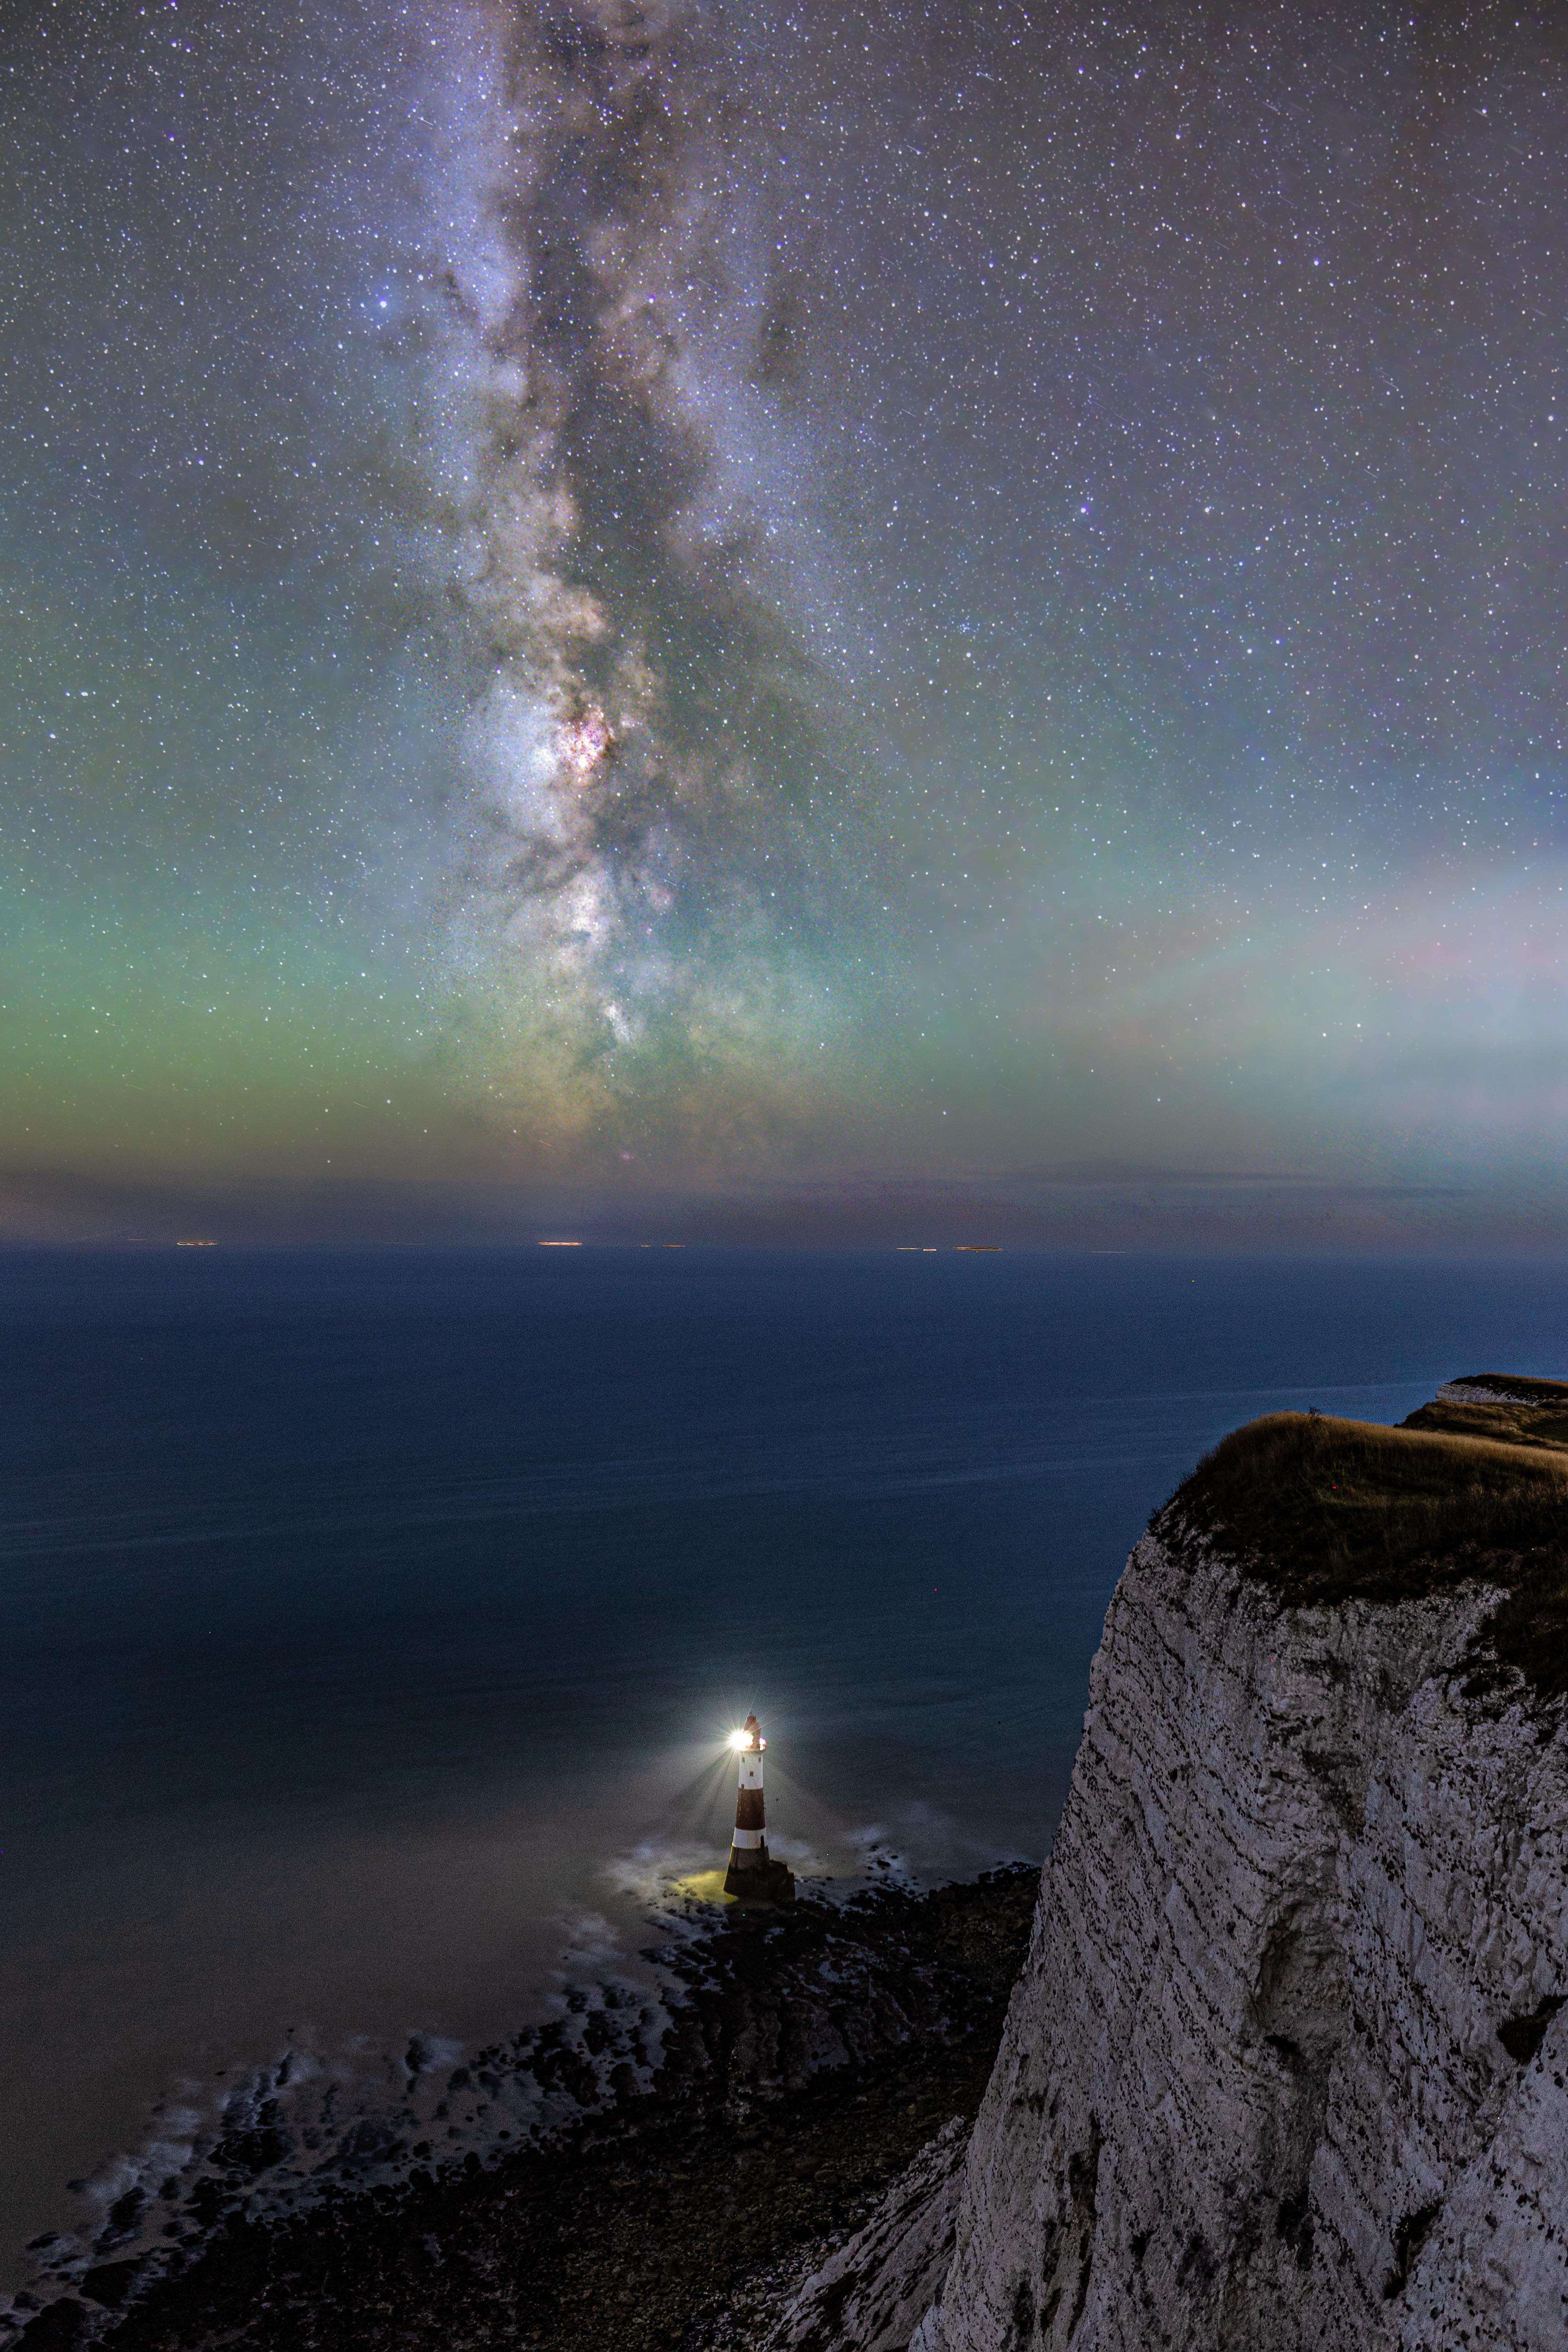 image showing ITAP of the Milky Way above Beachy Head lighthouse.